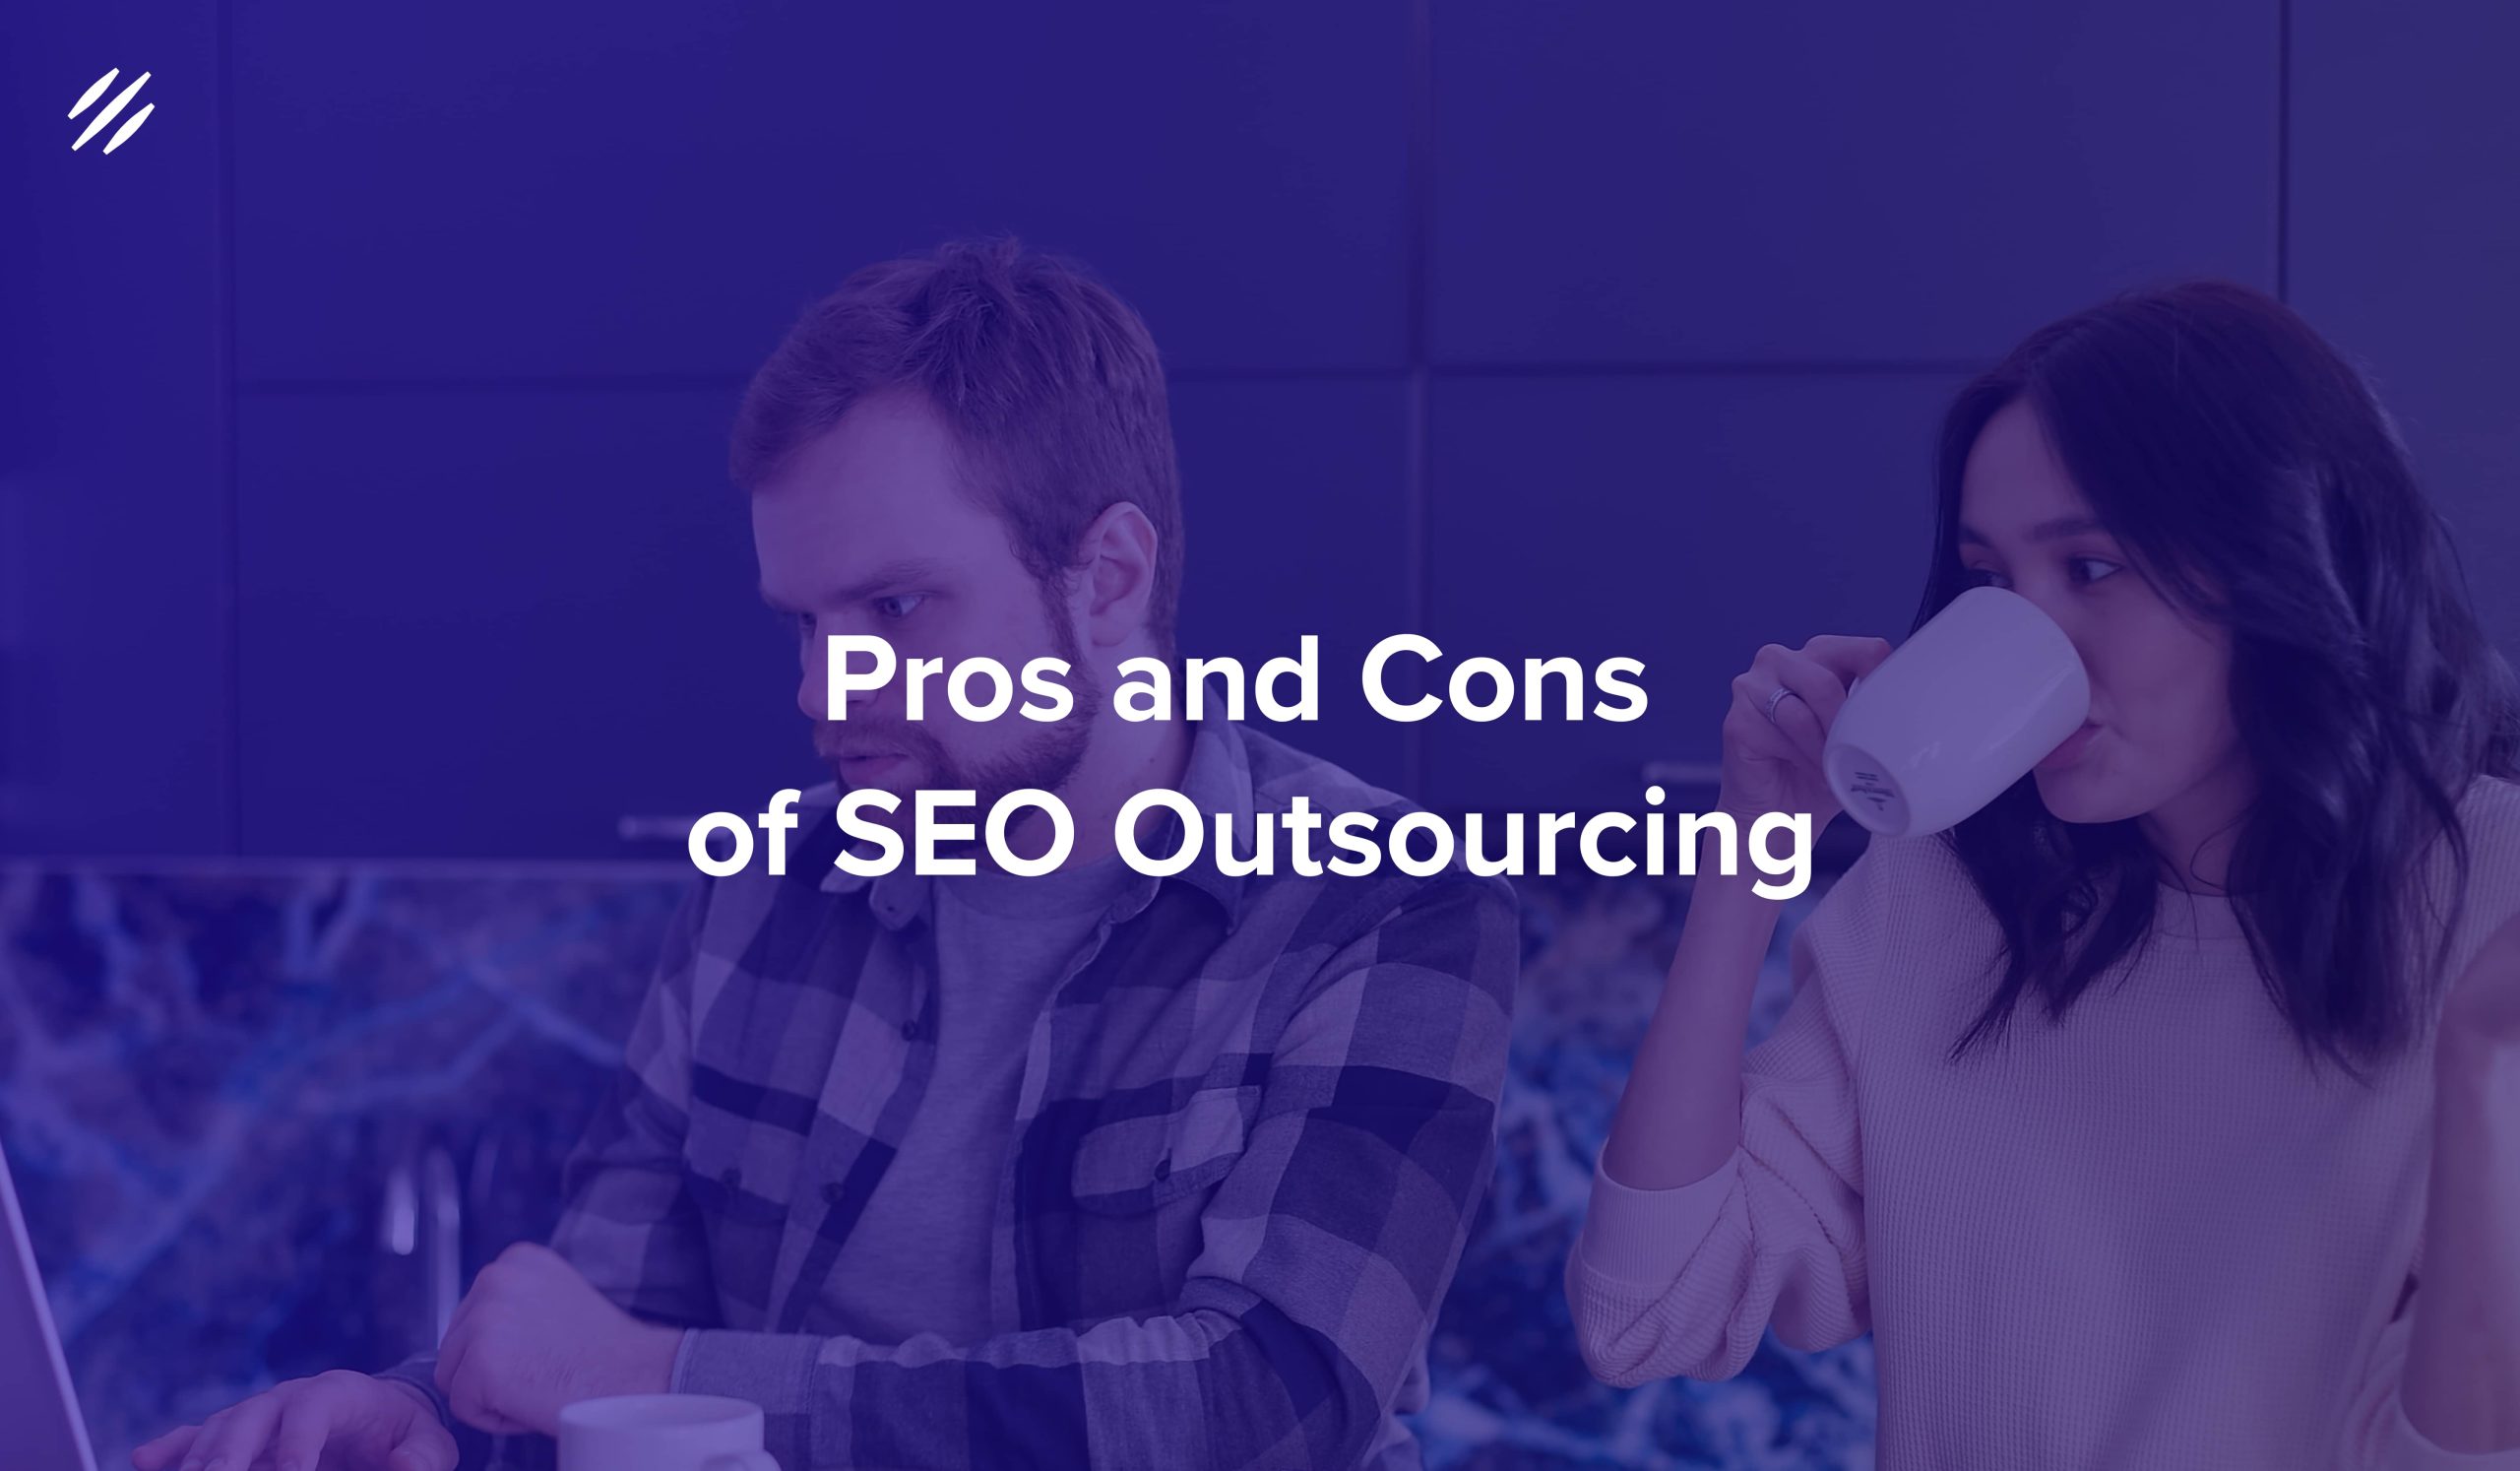 Pros and Cons of SEO Outsourcing